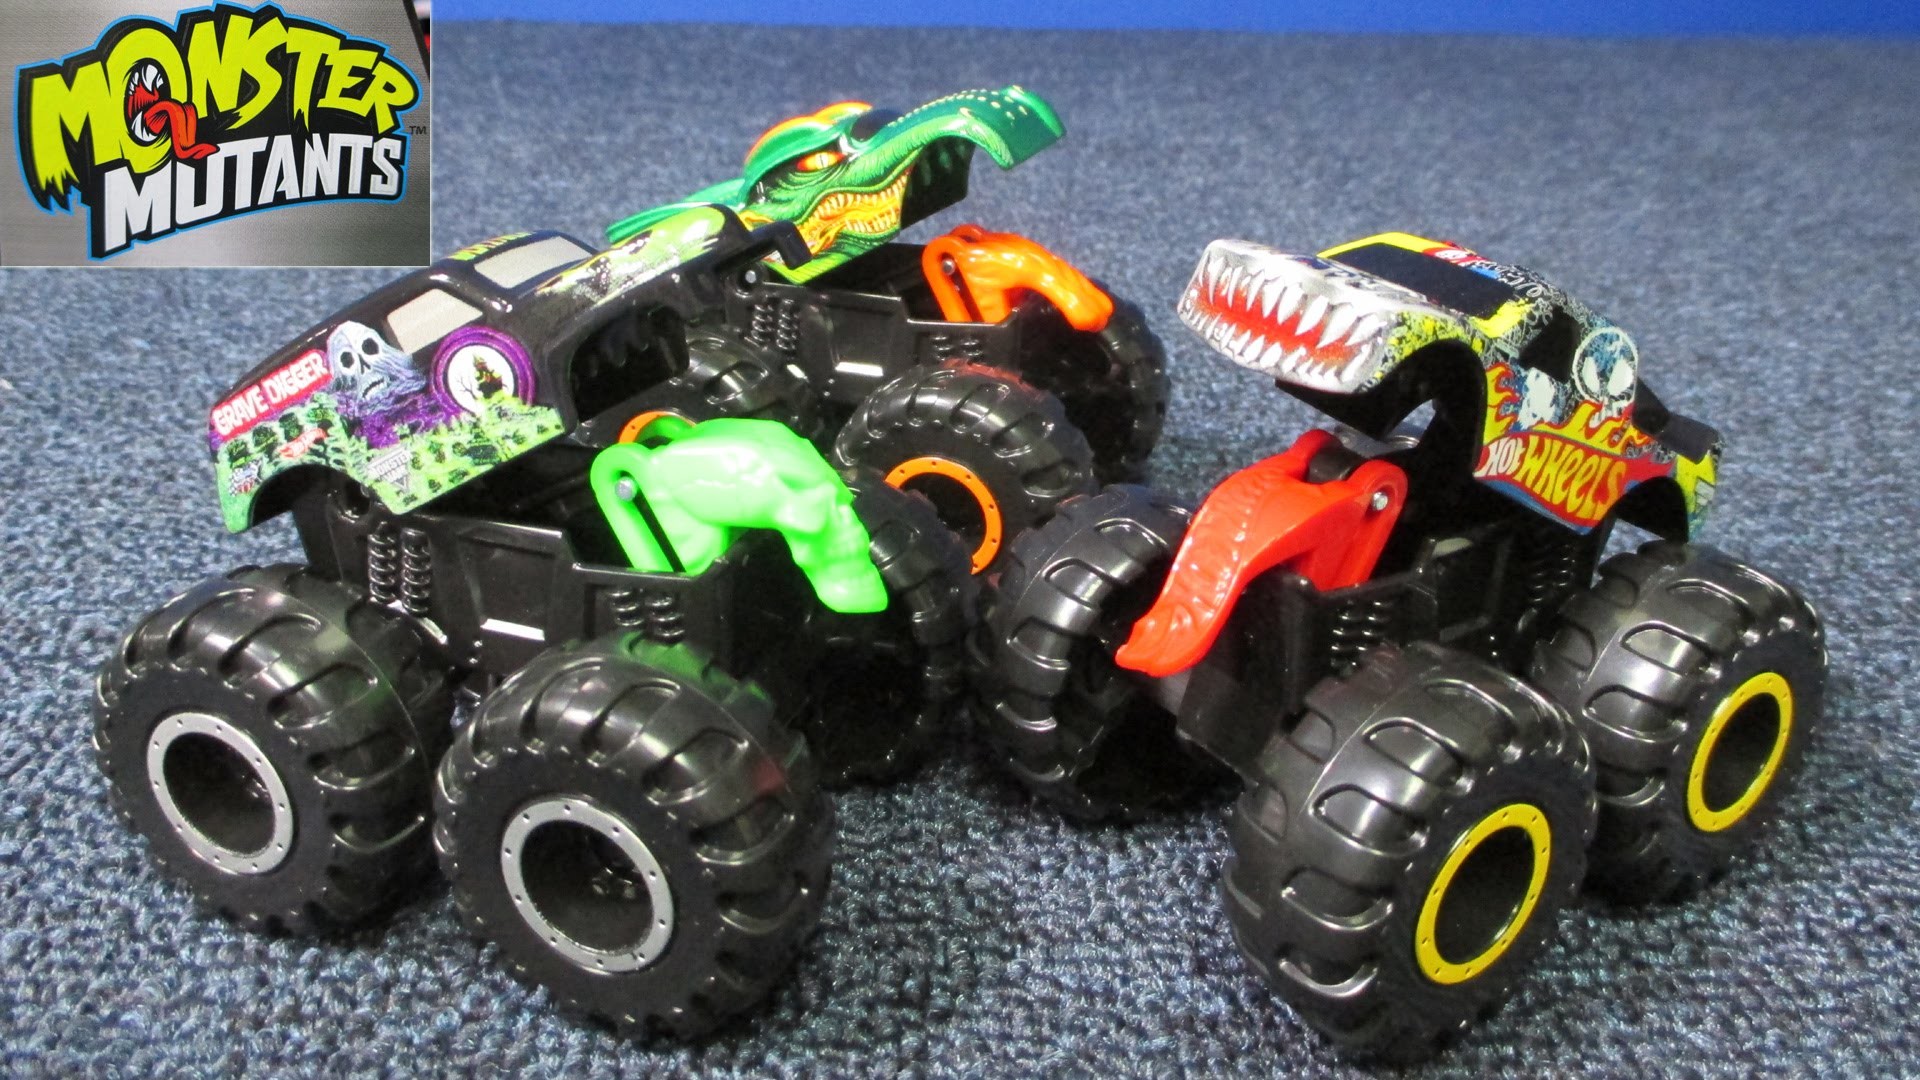 1920x1080 Hot Wheels Monster Jam Monster Mutants With Opening Features! - YouTube